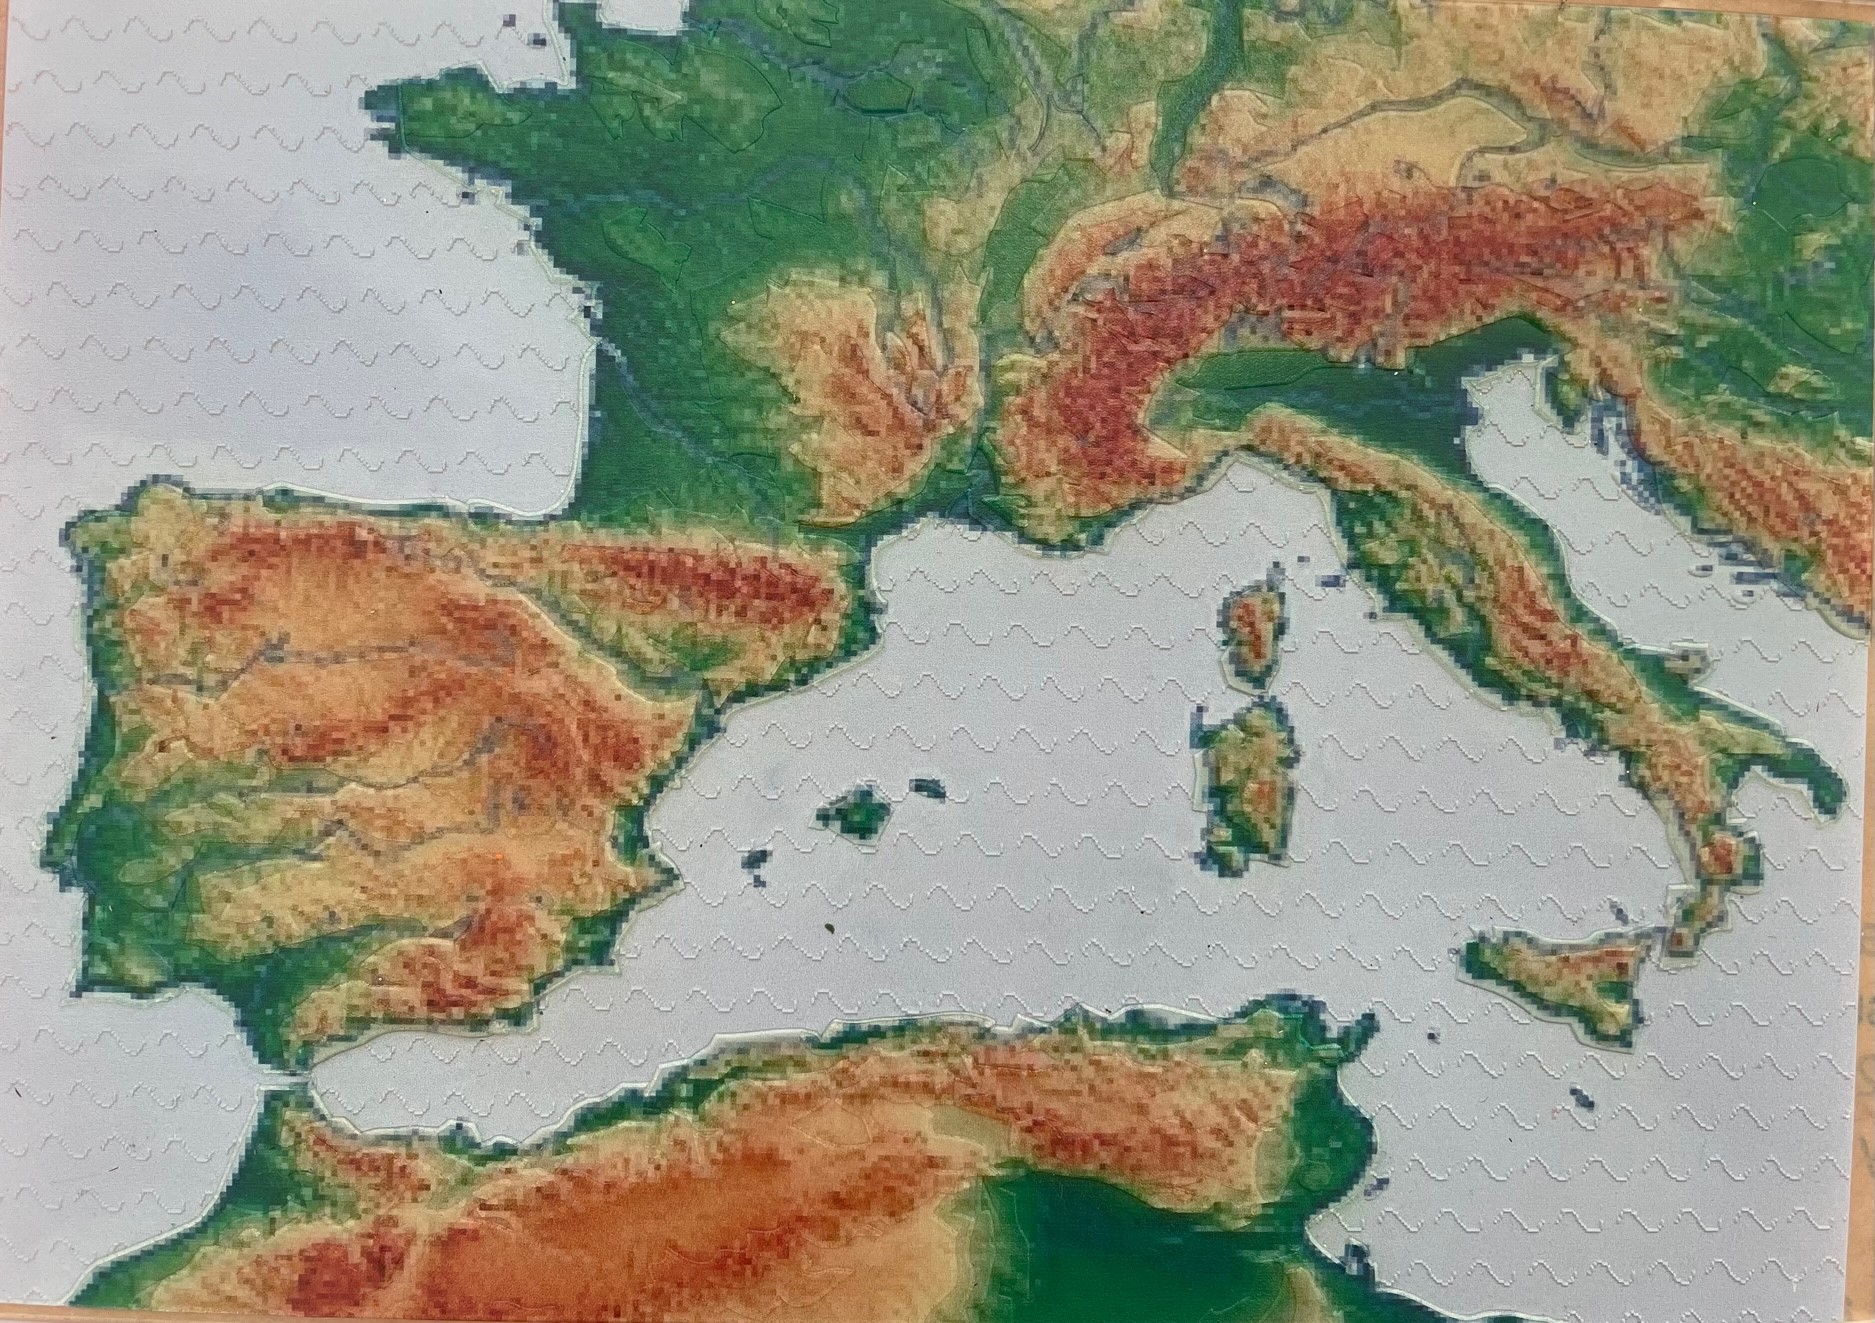 "A map with raised landmasses and points of interest."